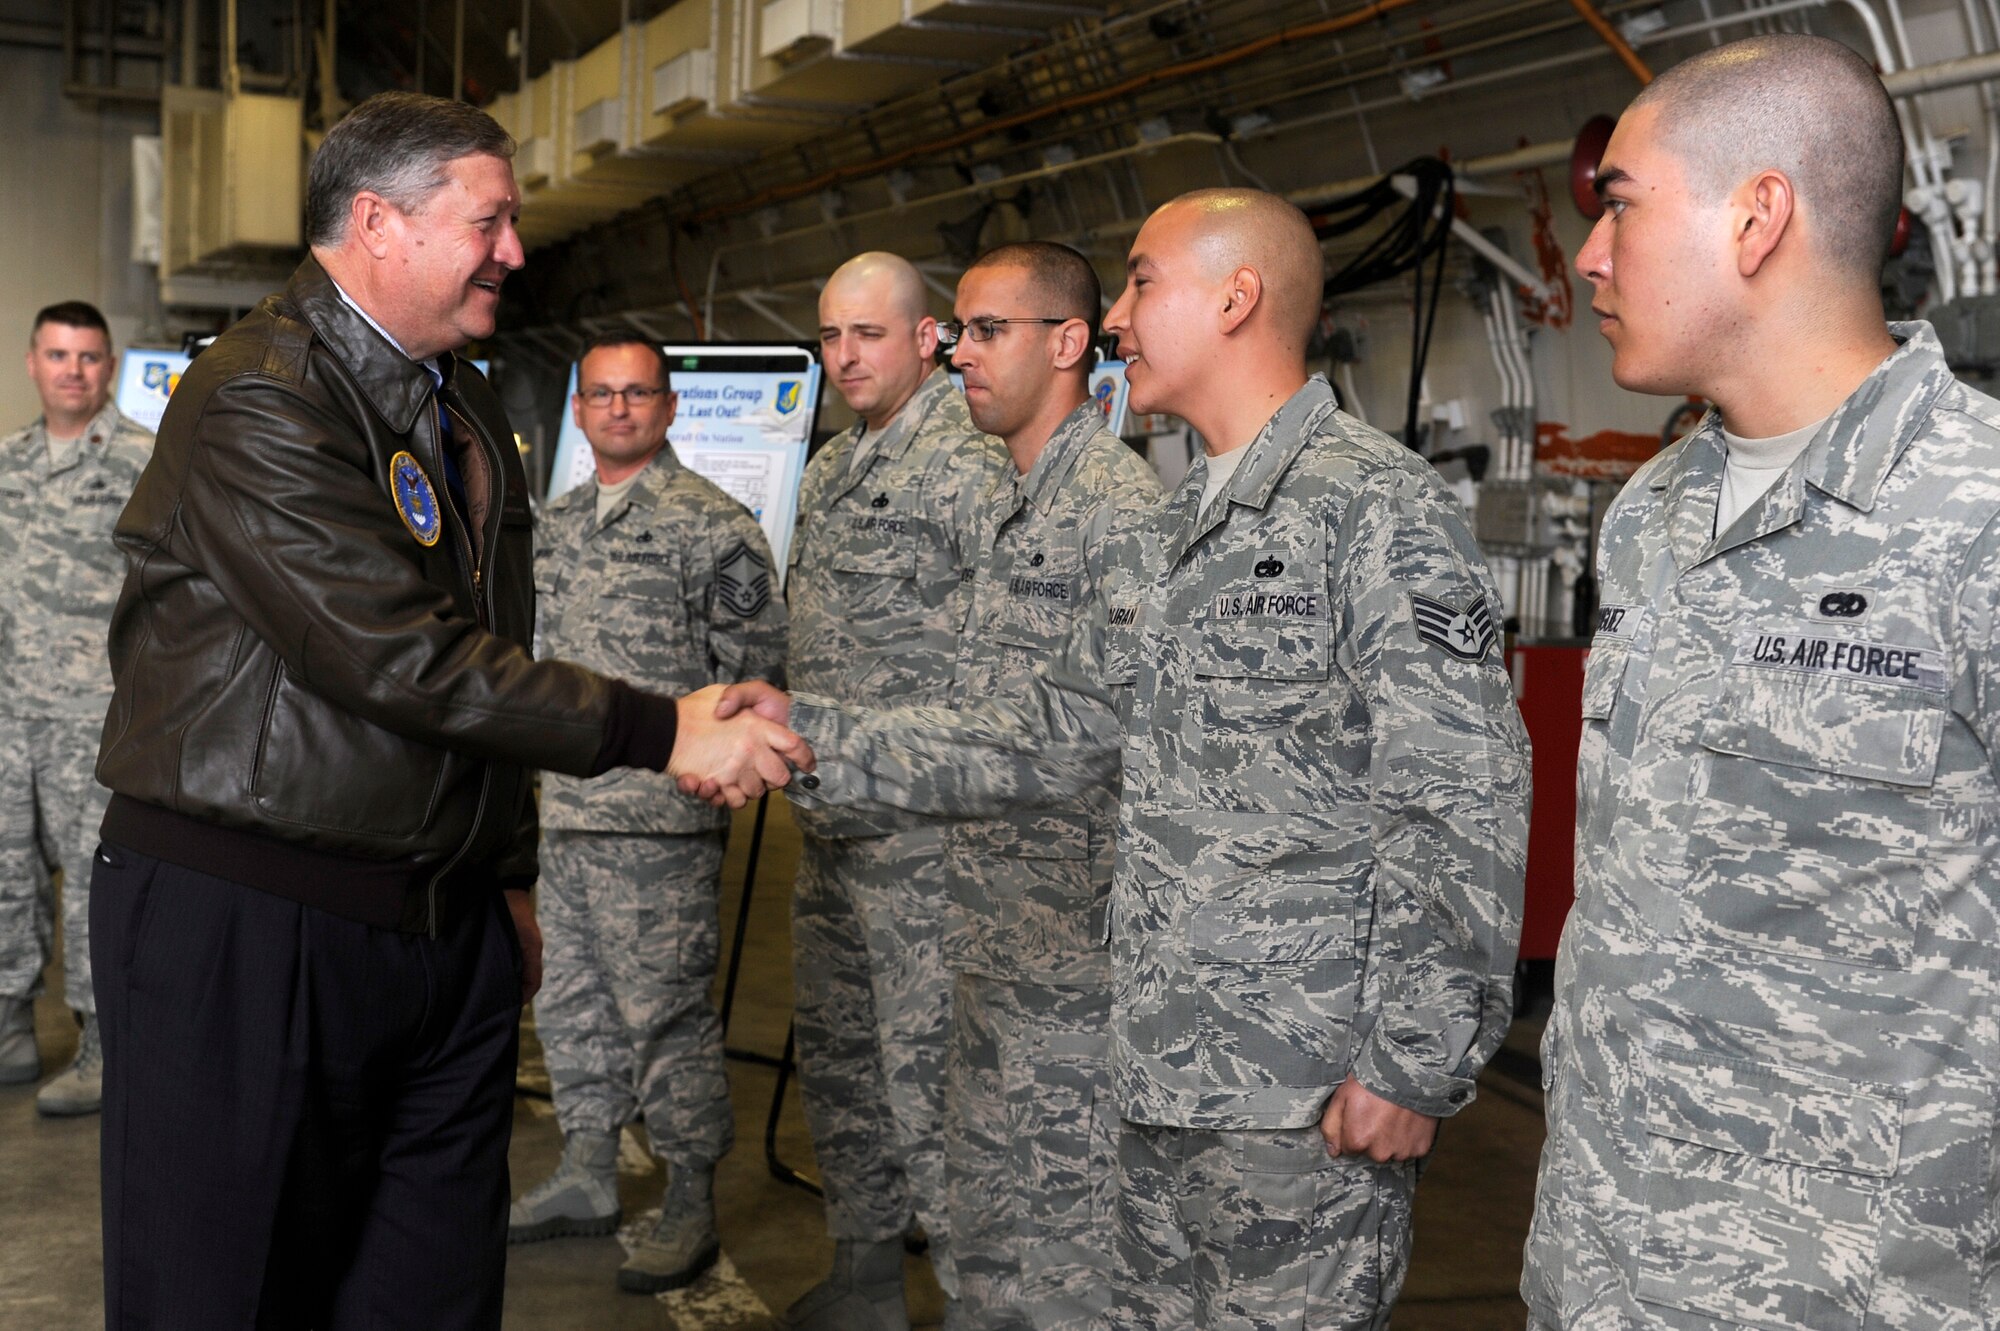 Secretary of the Air Force Michael Donley greets Airmen from the 35th Maintenance Group during a visit to Misawa Air Base, Japan, April 23, 2012. (U.S. Air Force photo by Tech. Sgt. Marie Brown/Released)
